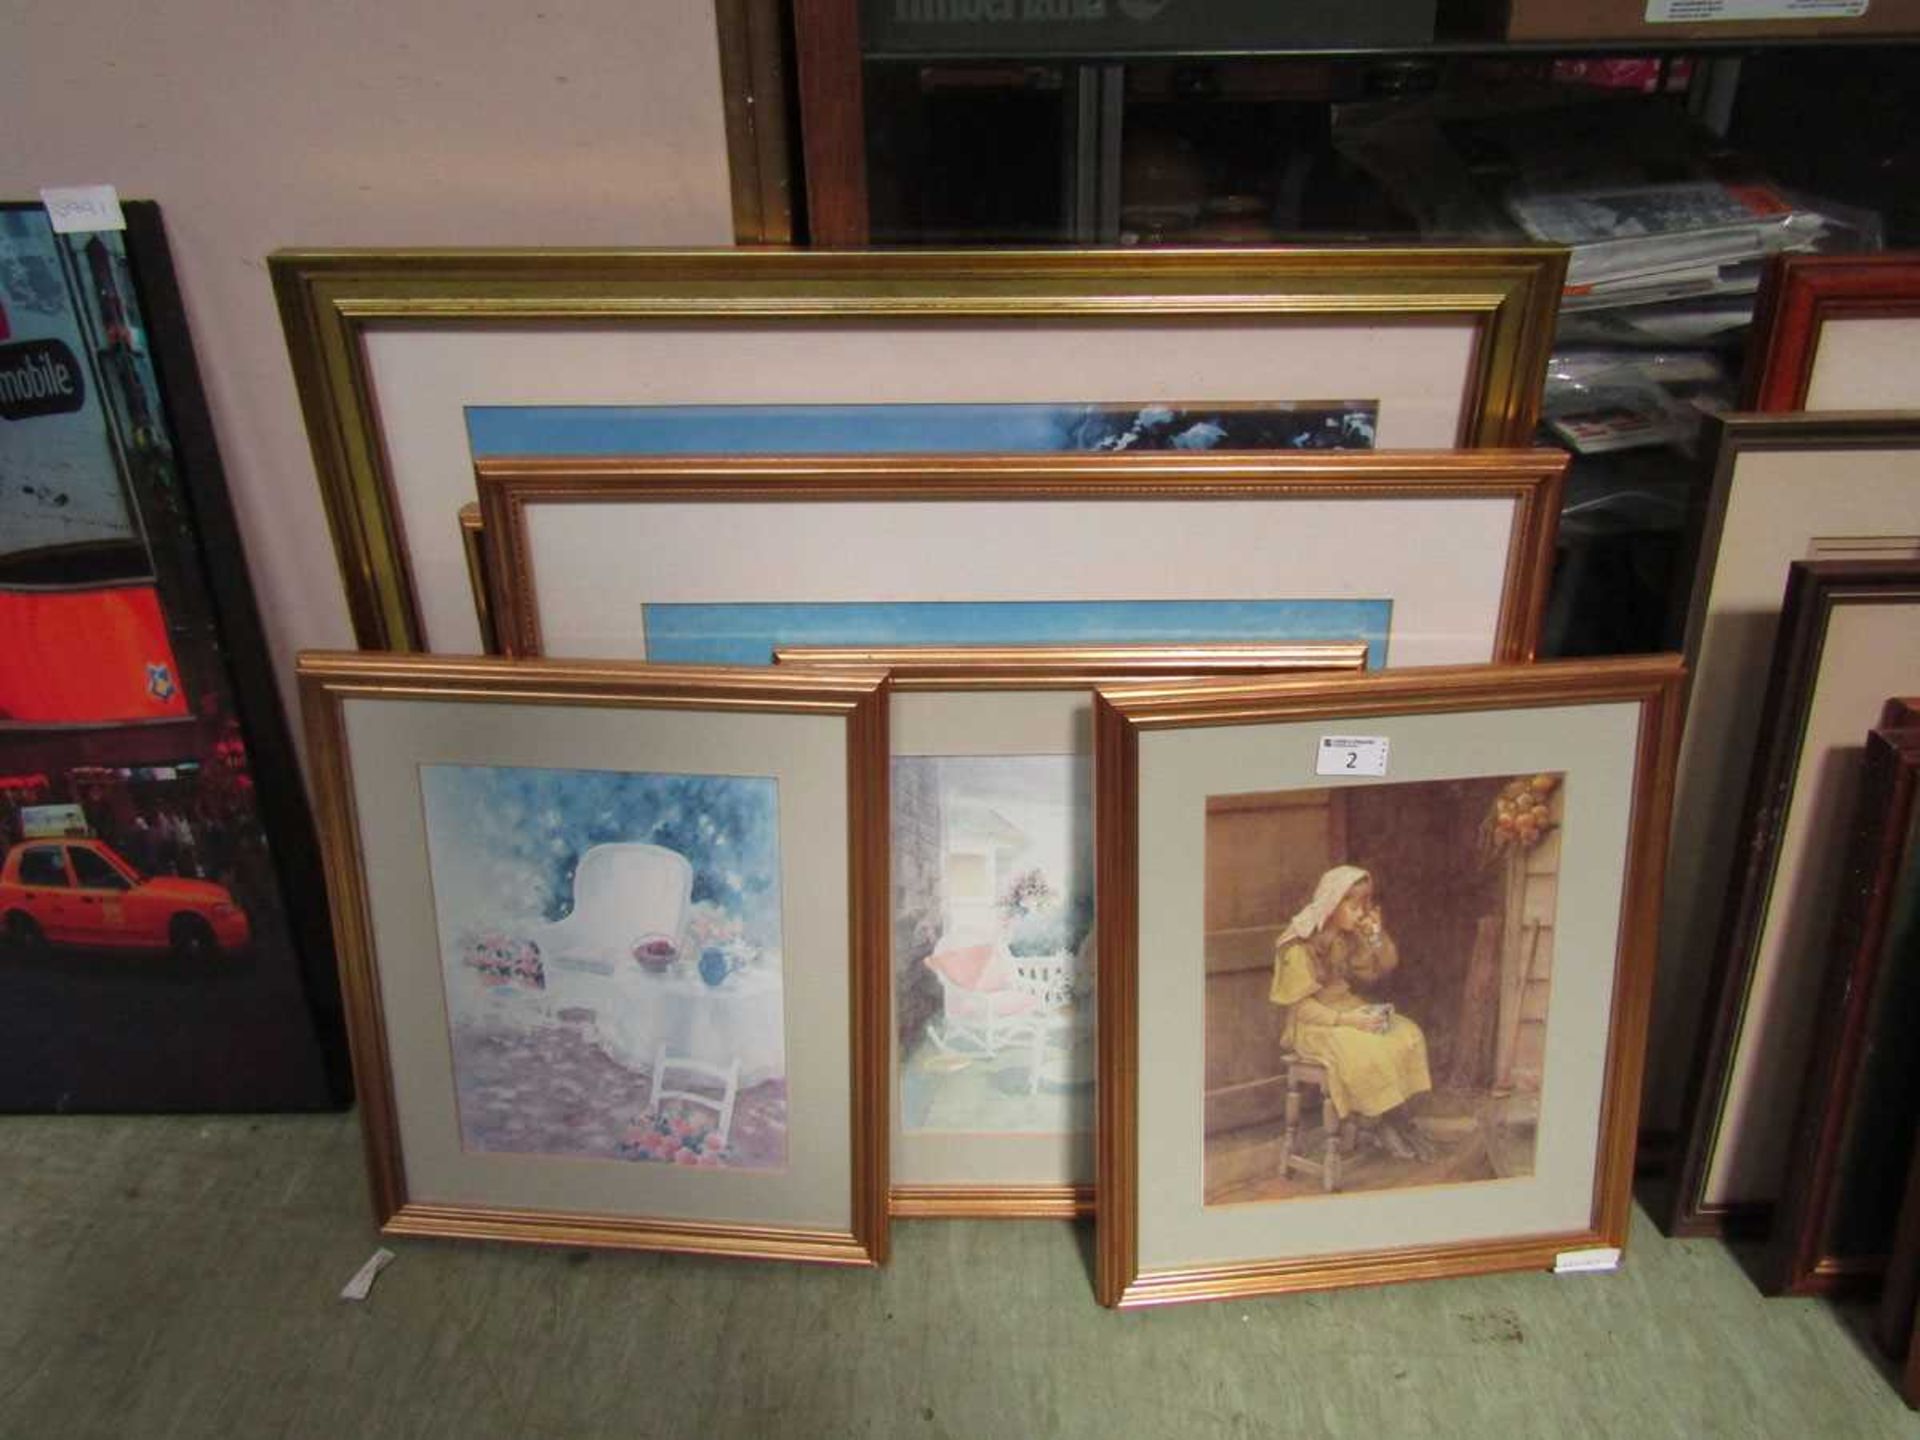 A selection of framed artworks on various subjects to include interior scenes, boating scenes, young